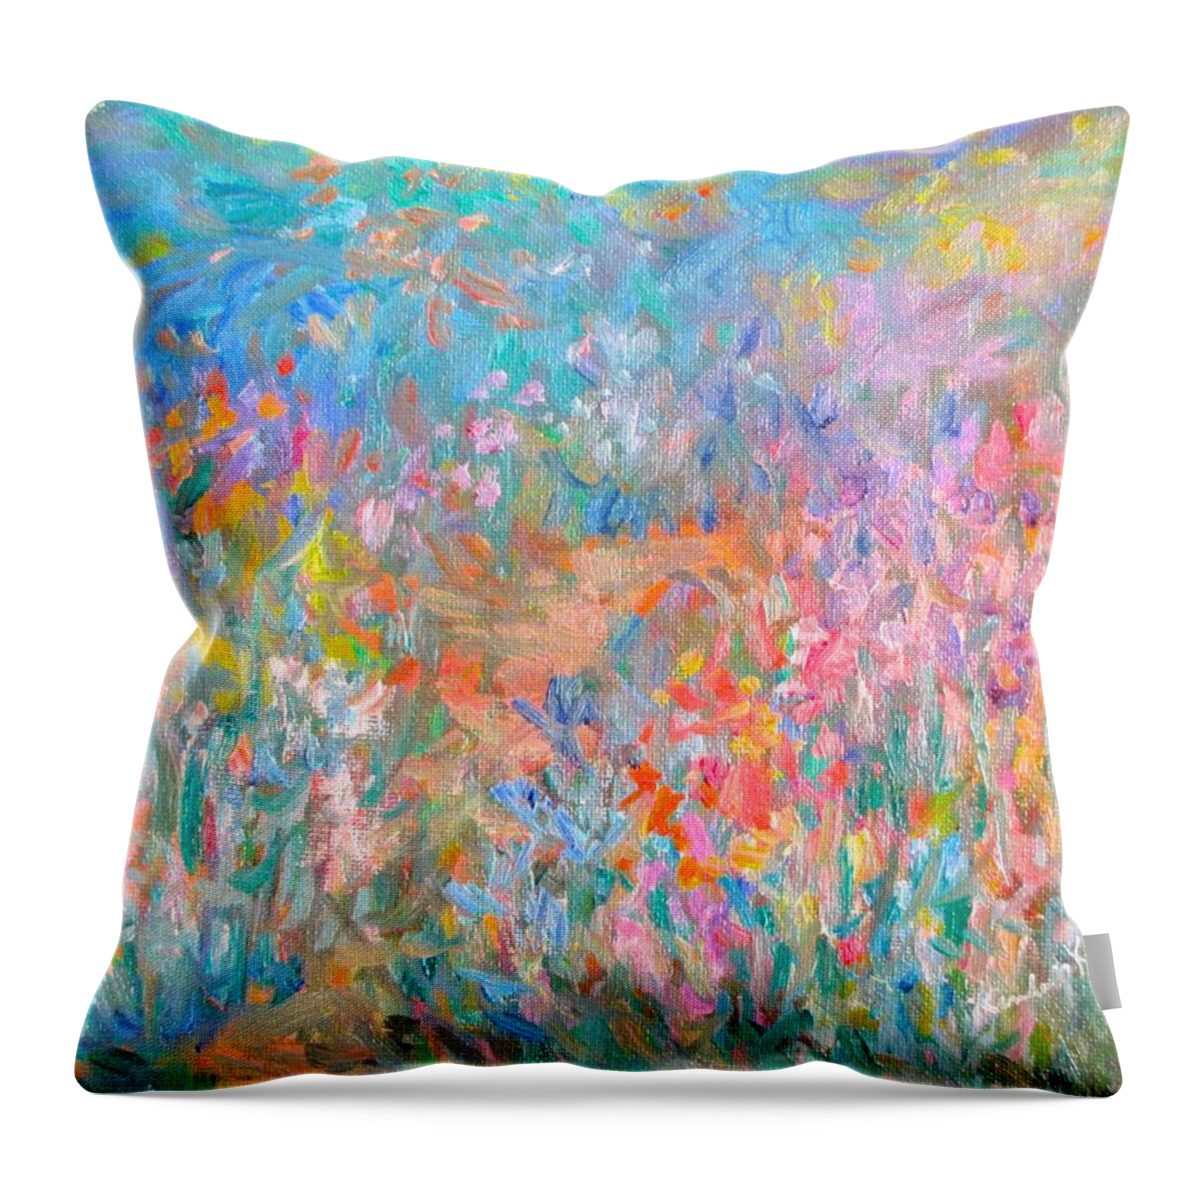 Wildflowers Throw Pillow featuring the painting Wildflower Mist Stage One by Kendall Kessler